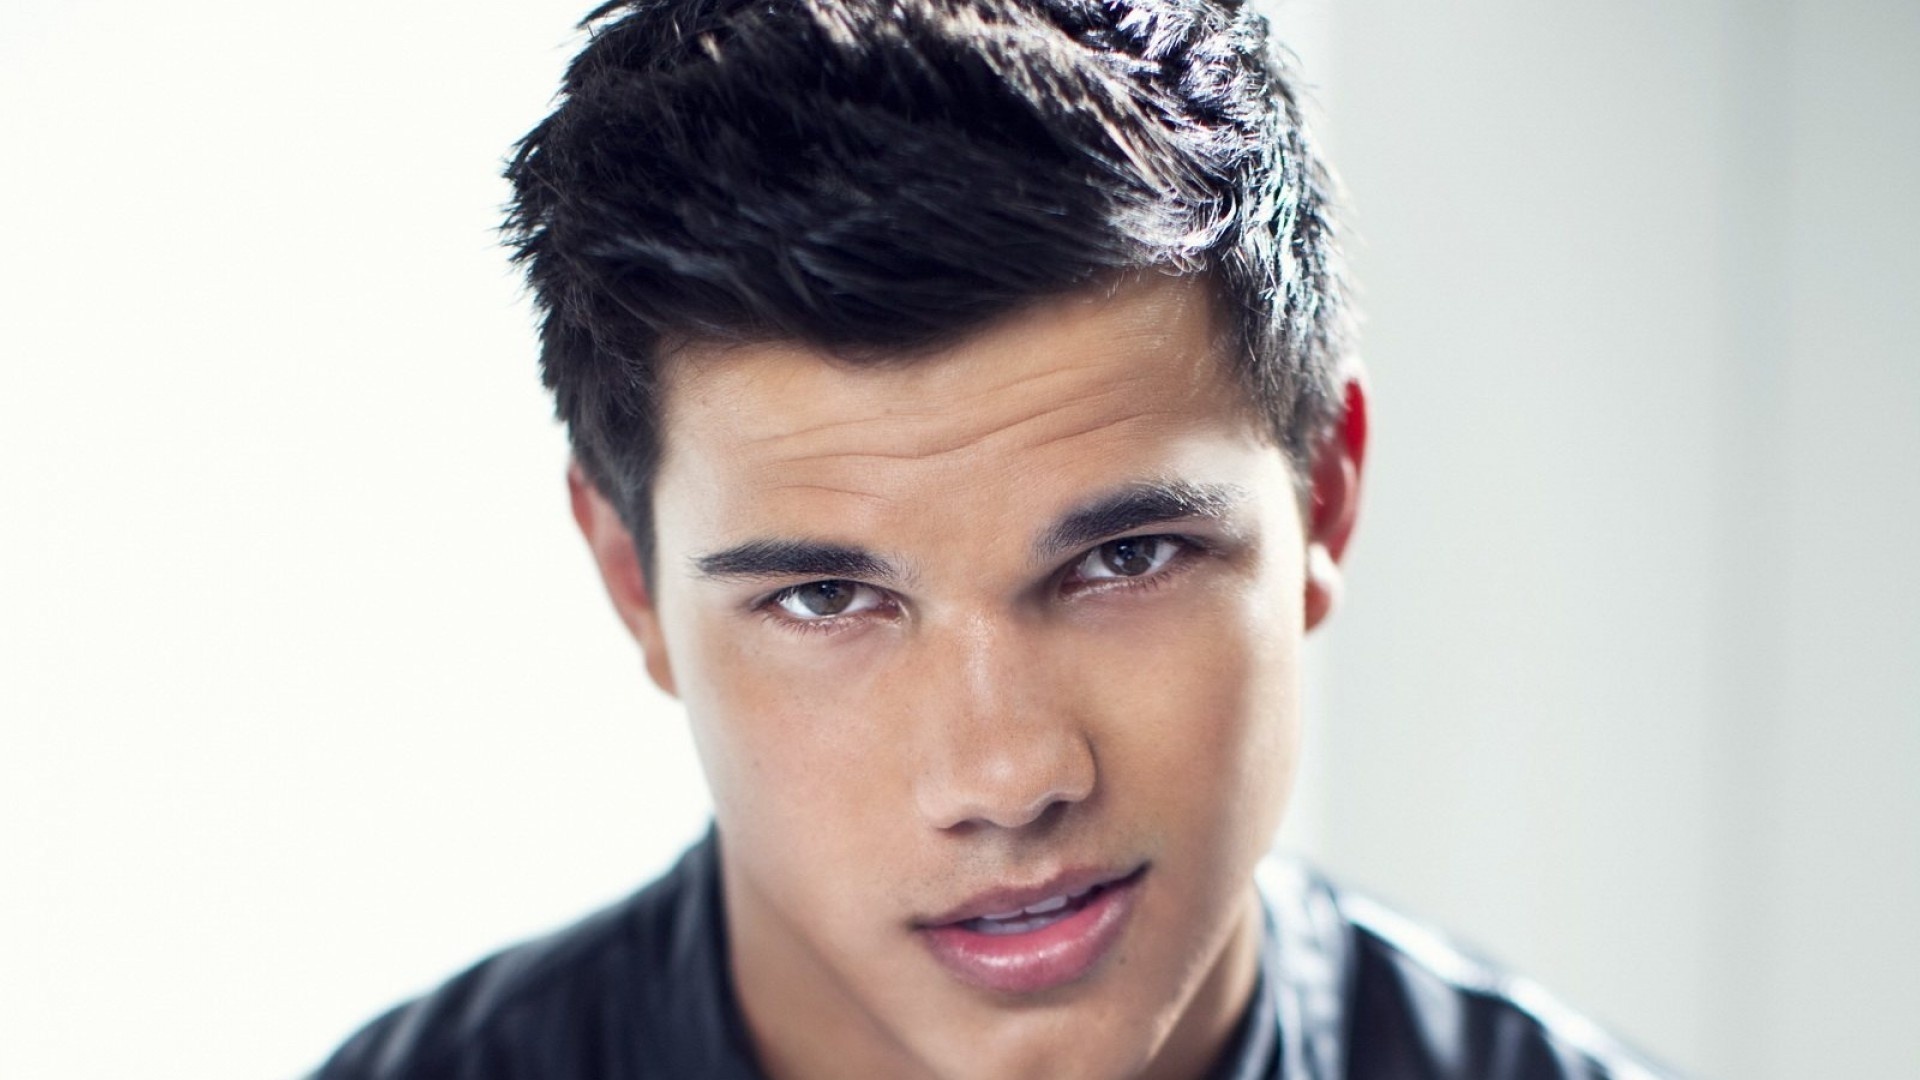  Taylor Lautner Cellphone FHD pic